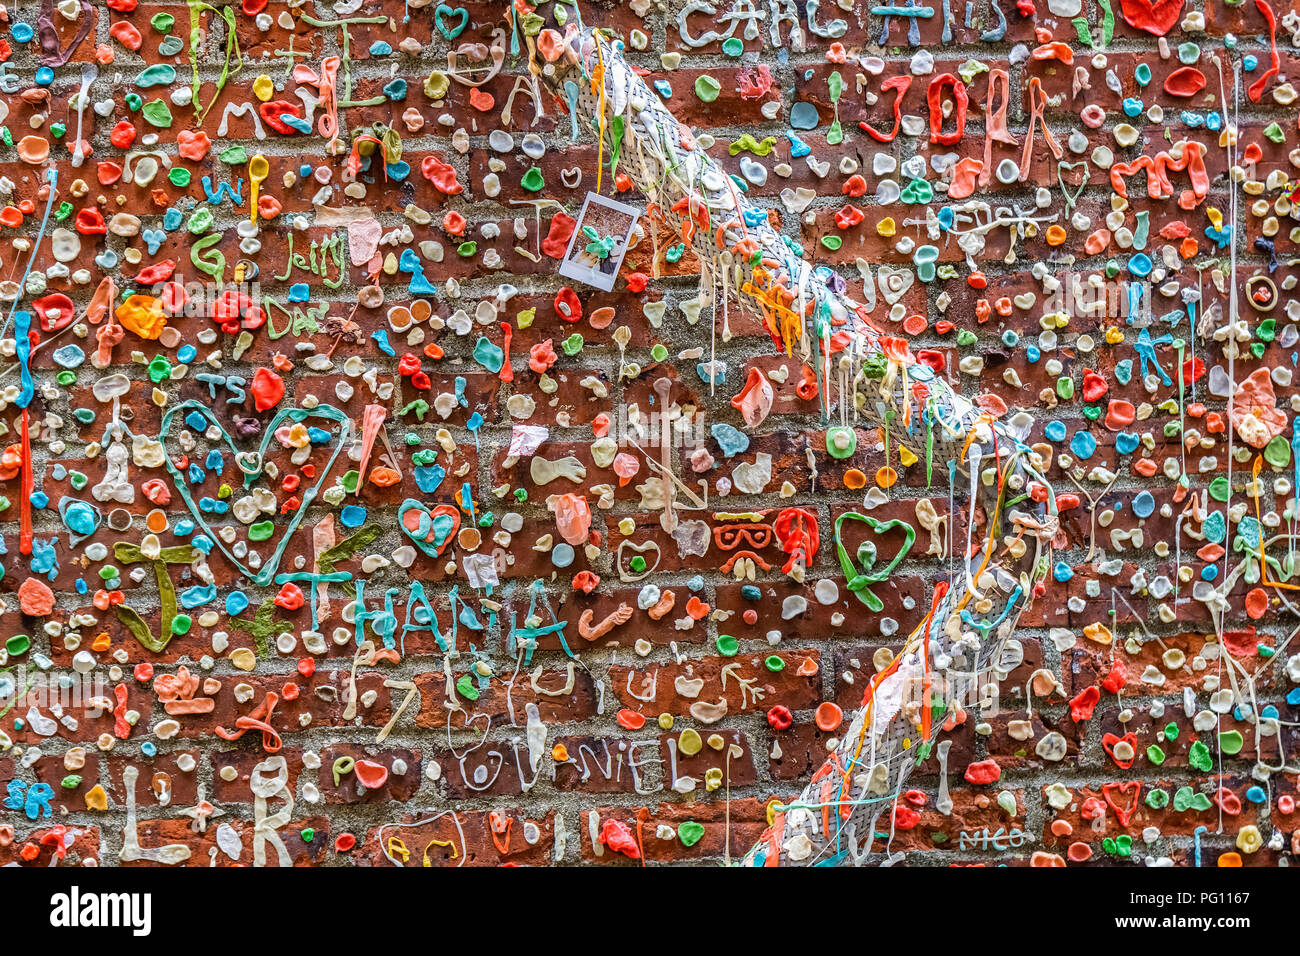 The Gum Wall in Post Alley, near Pike Place Market, living artwork landmark in downtown Seattle, Washington state, USA. Stock Photo